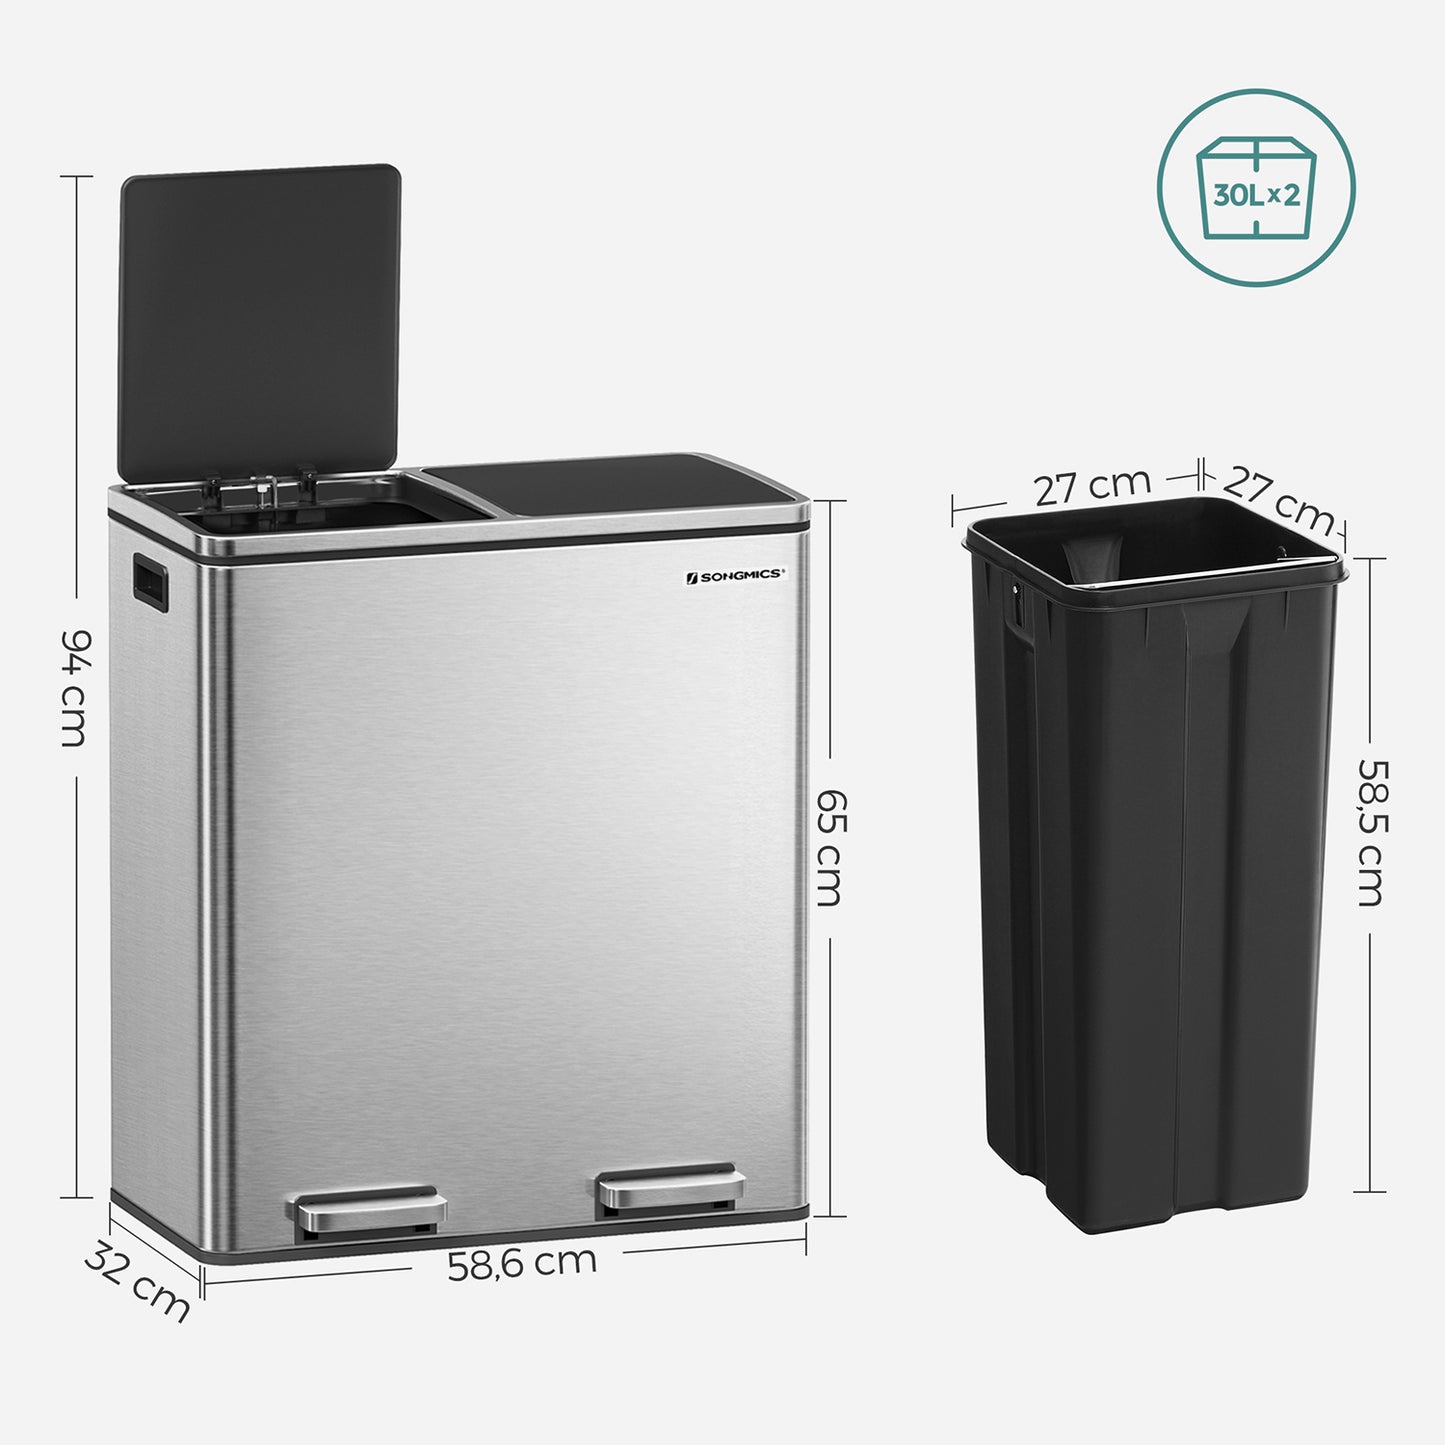 Double Recycle Pedal Bin, 2 x 30L Rubbish Trash Can with Dual Compartment, Fingerprint Proof Stainless Steel, 6